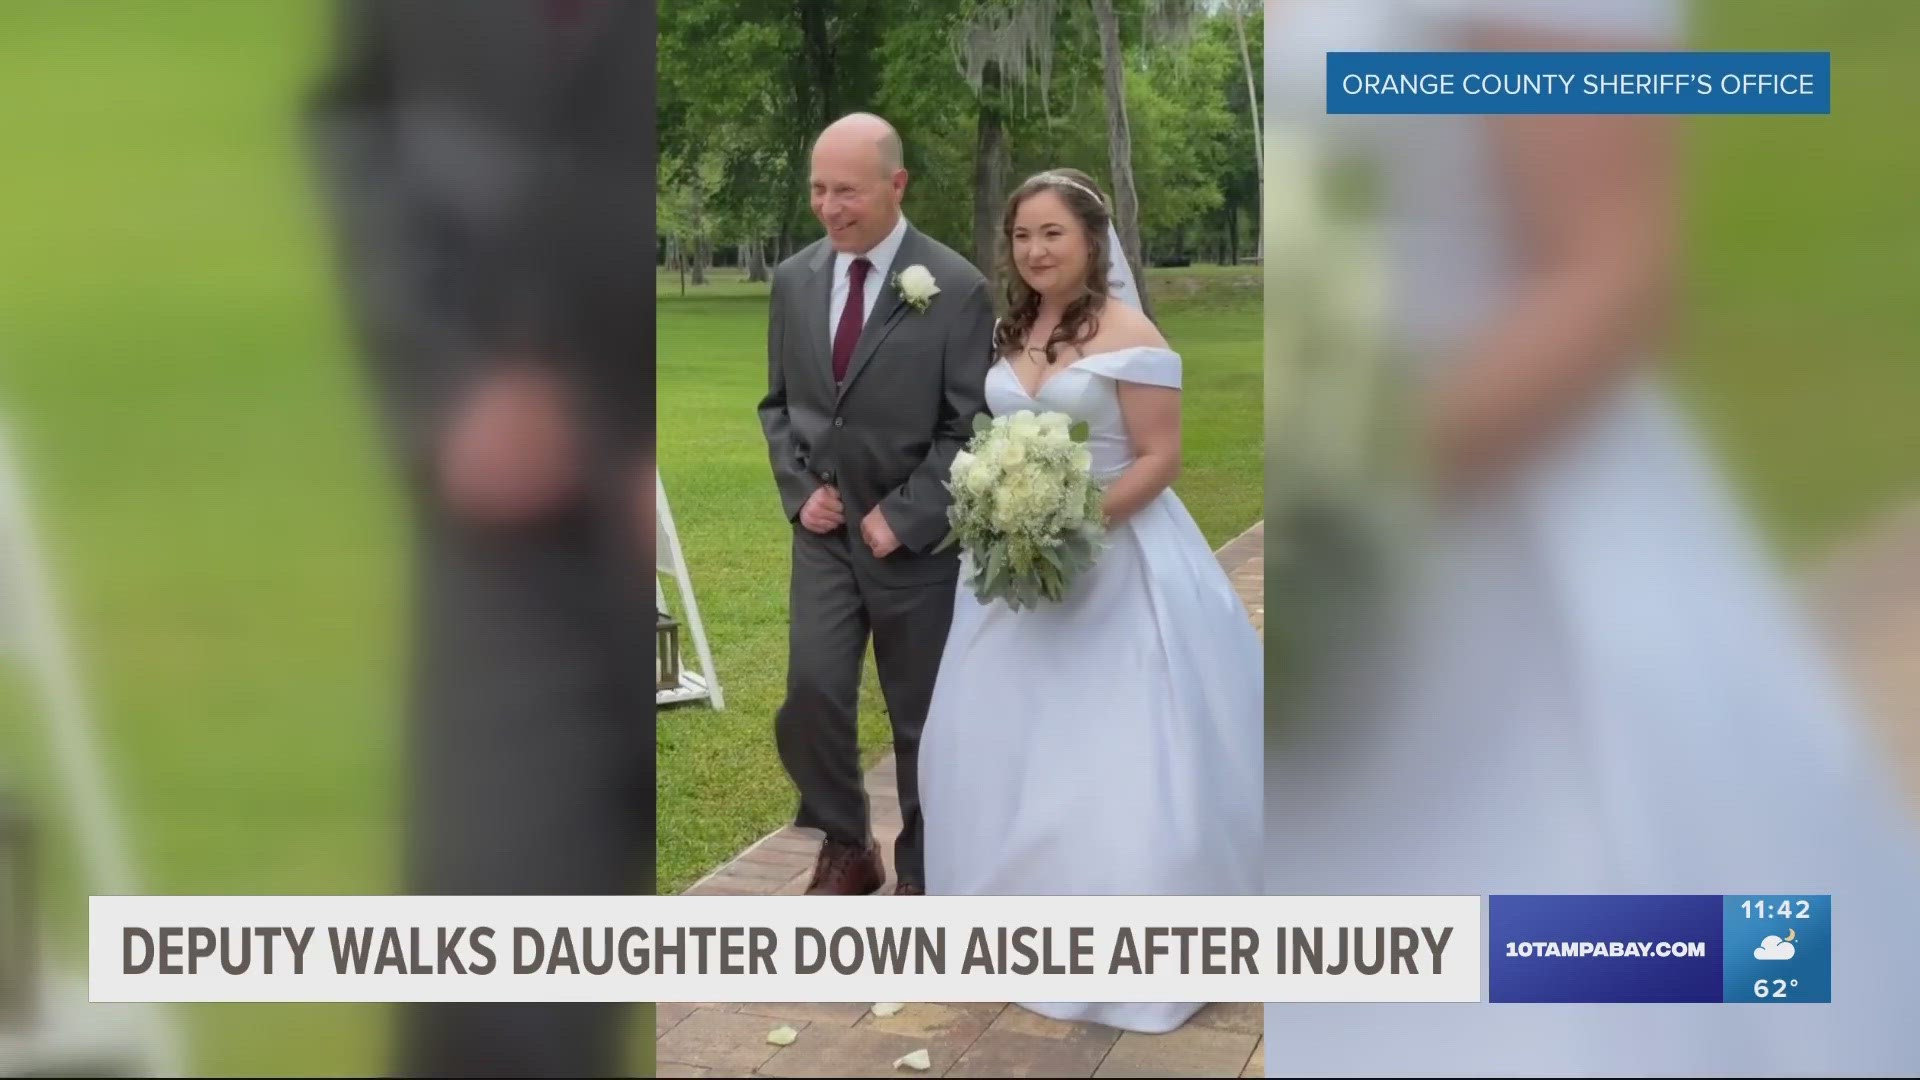 Over the last year, being able to walk his daughter down the aisle has been Harold Davis' main focus, the sheriff's office said.